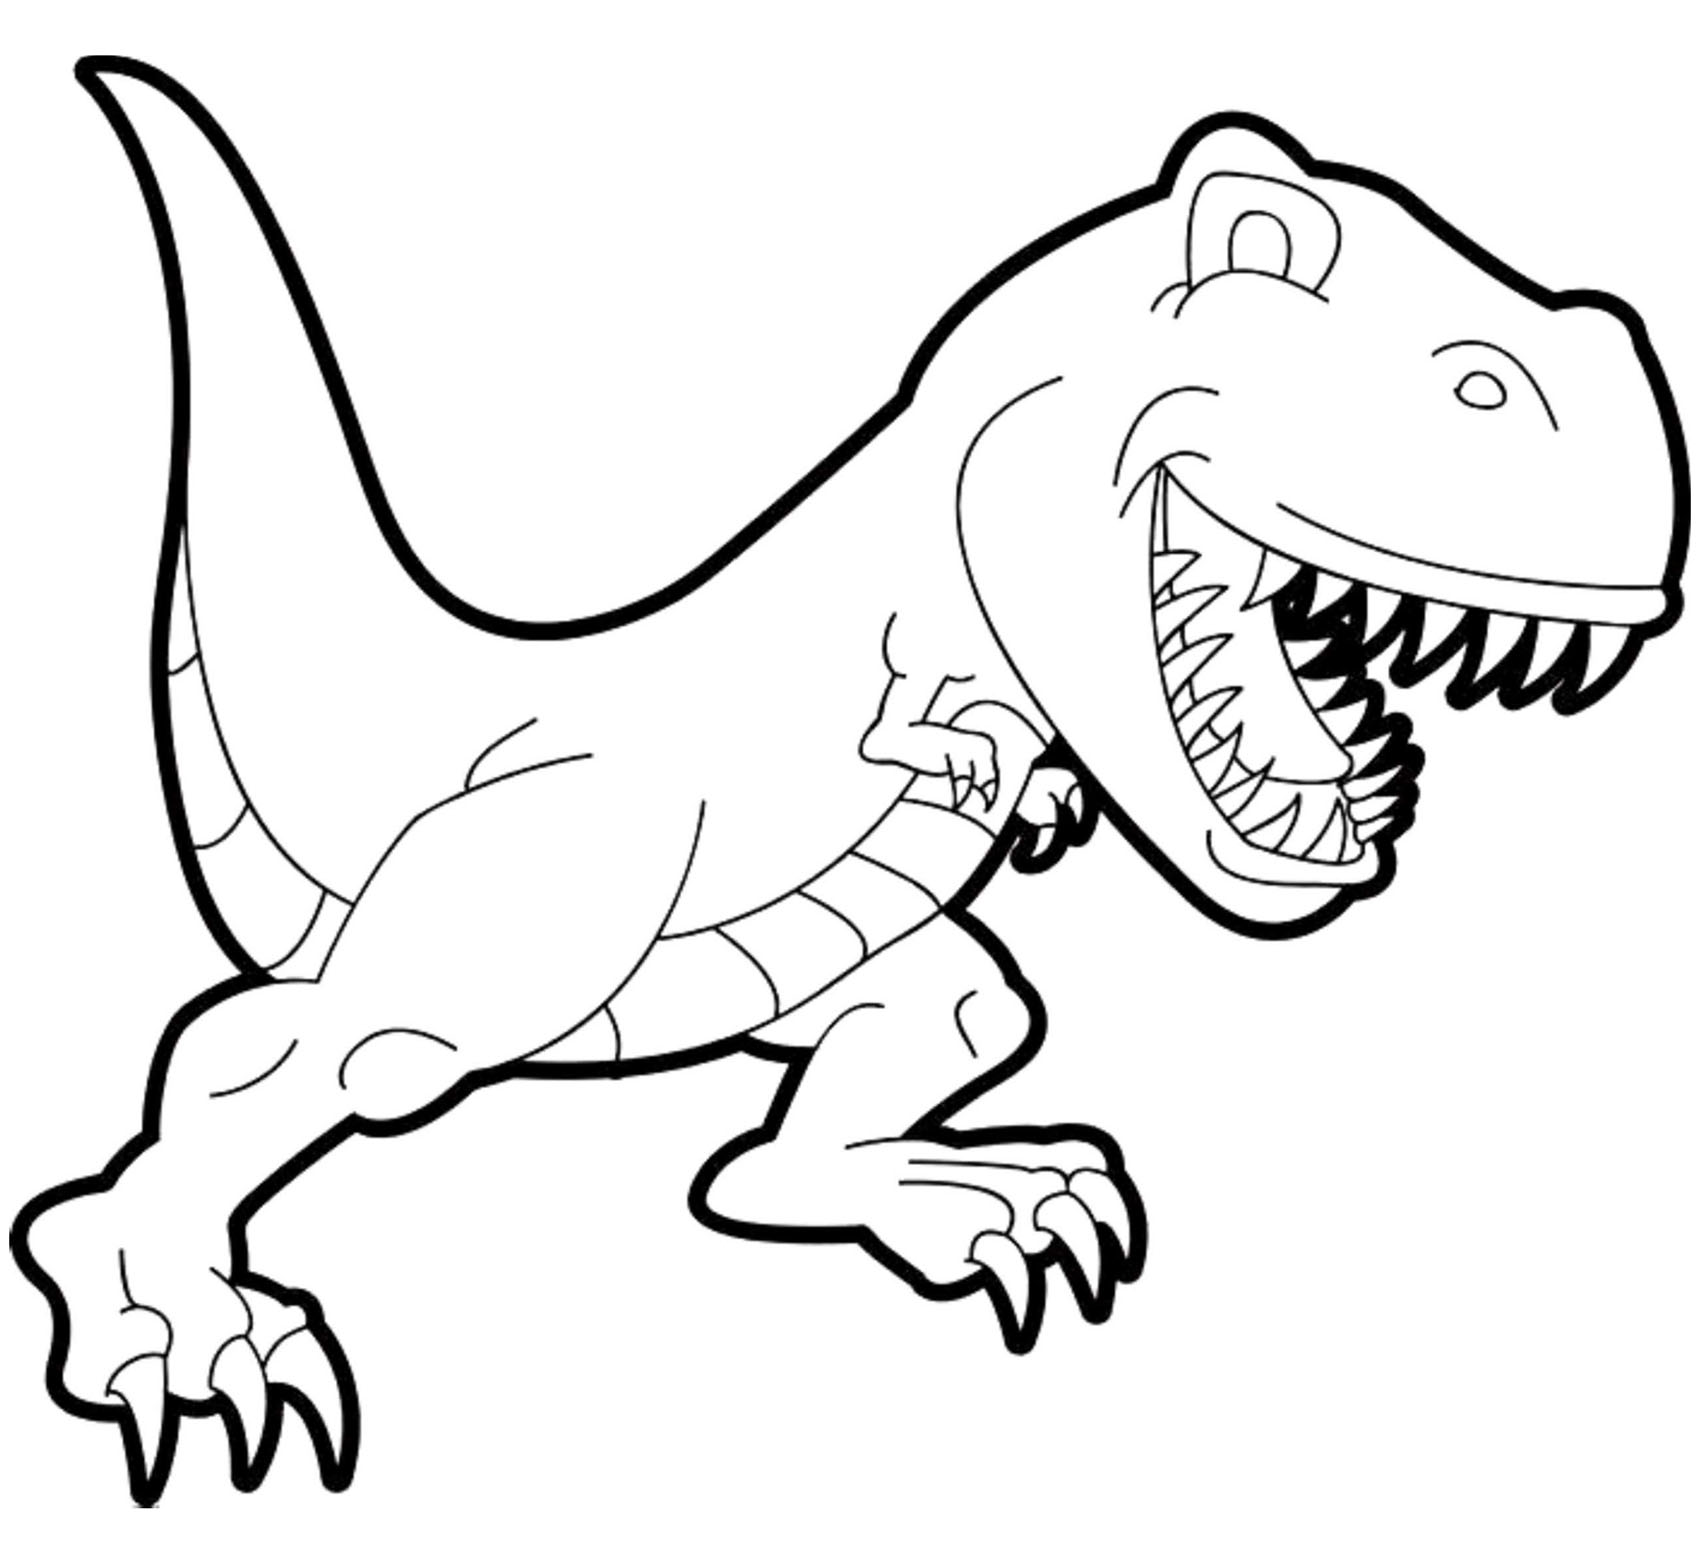  Free Dinosaur Coloring Pages with simple drawing